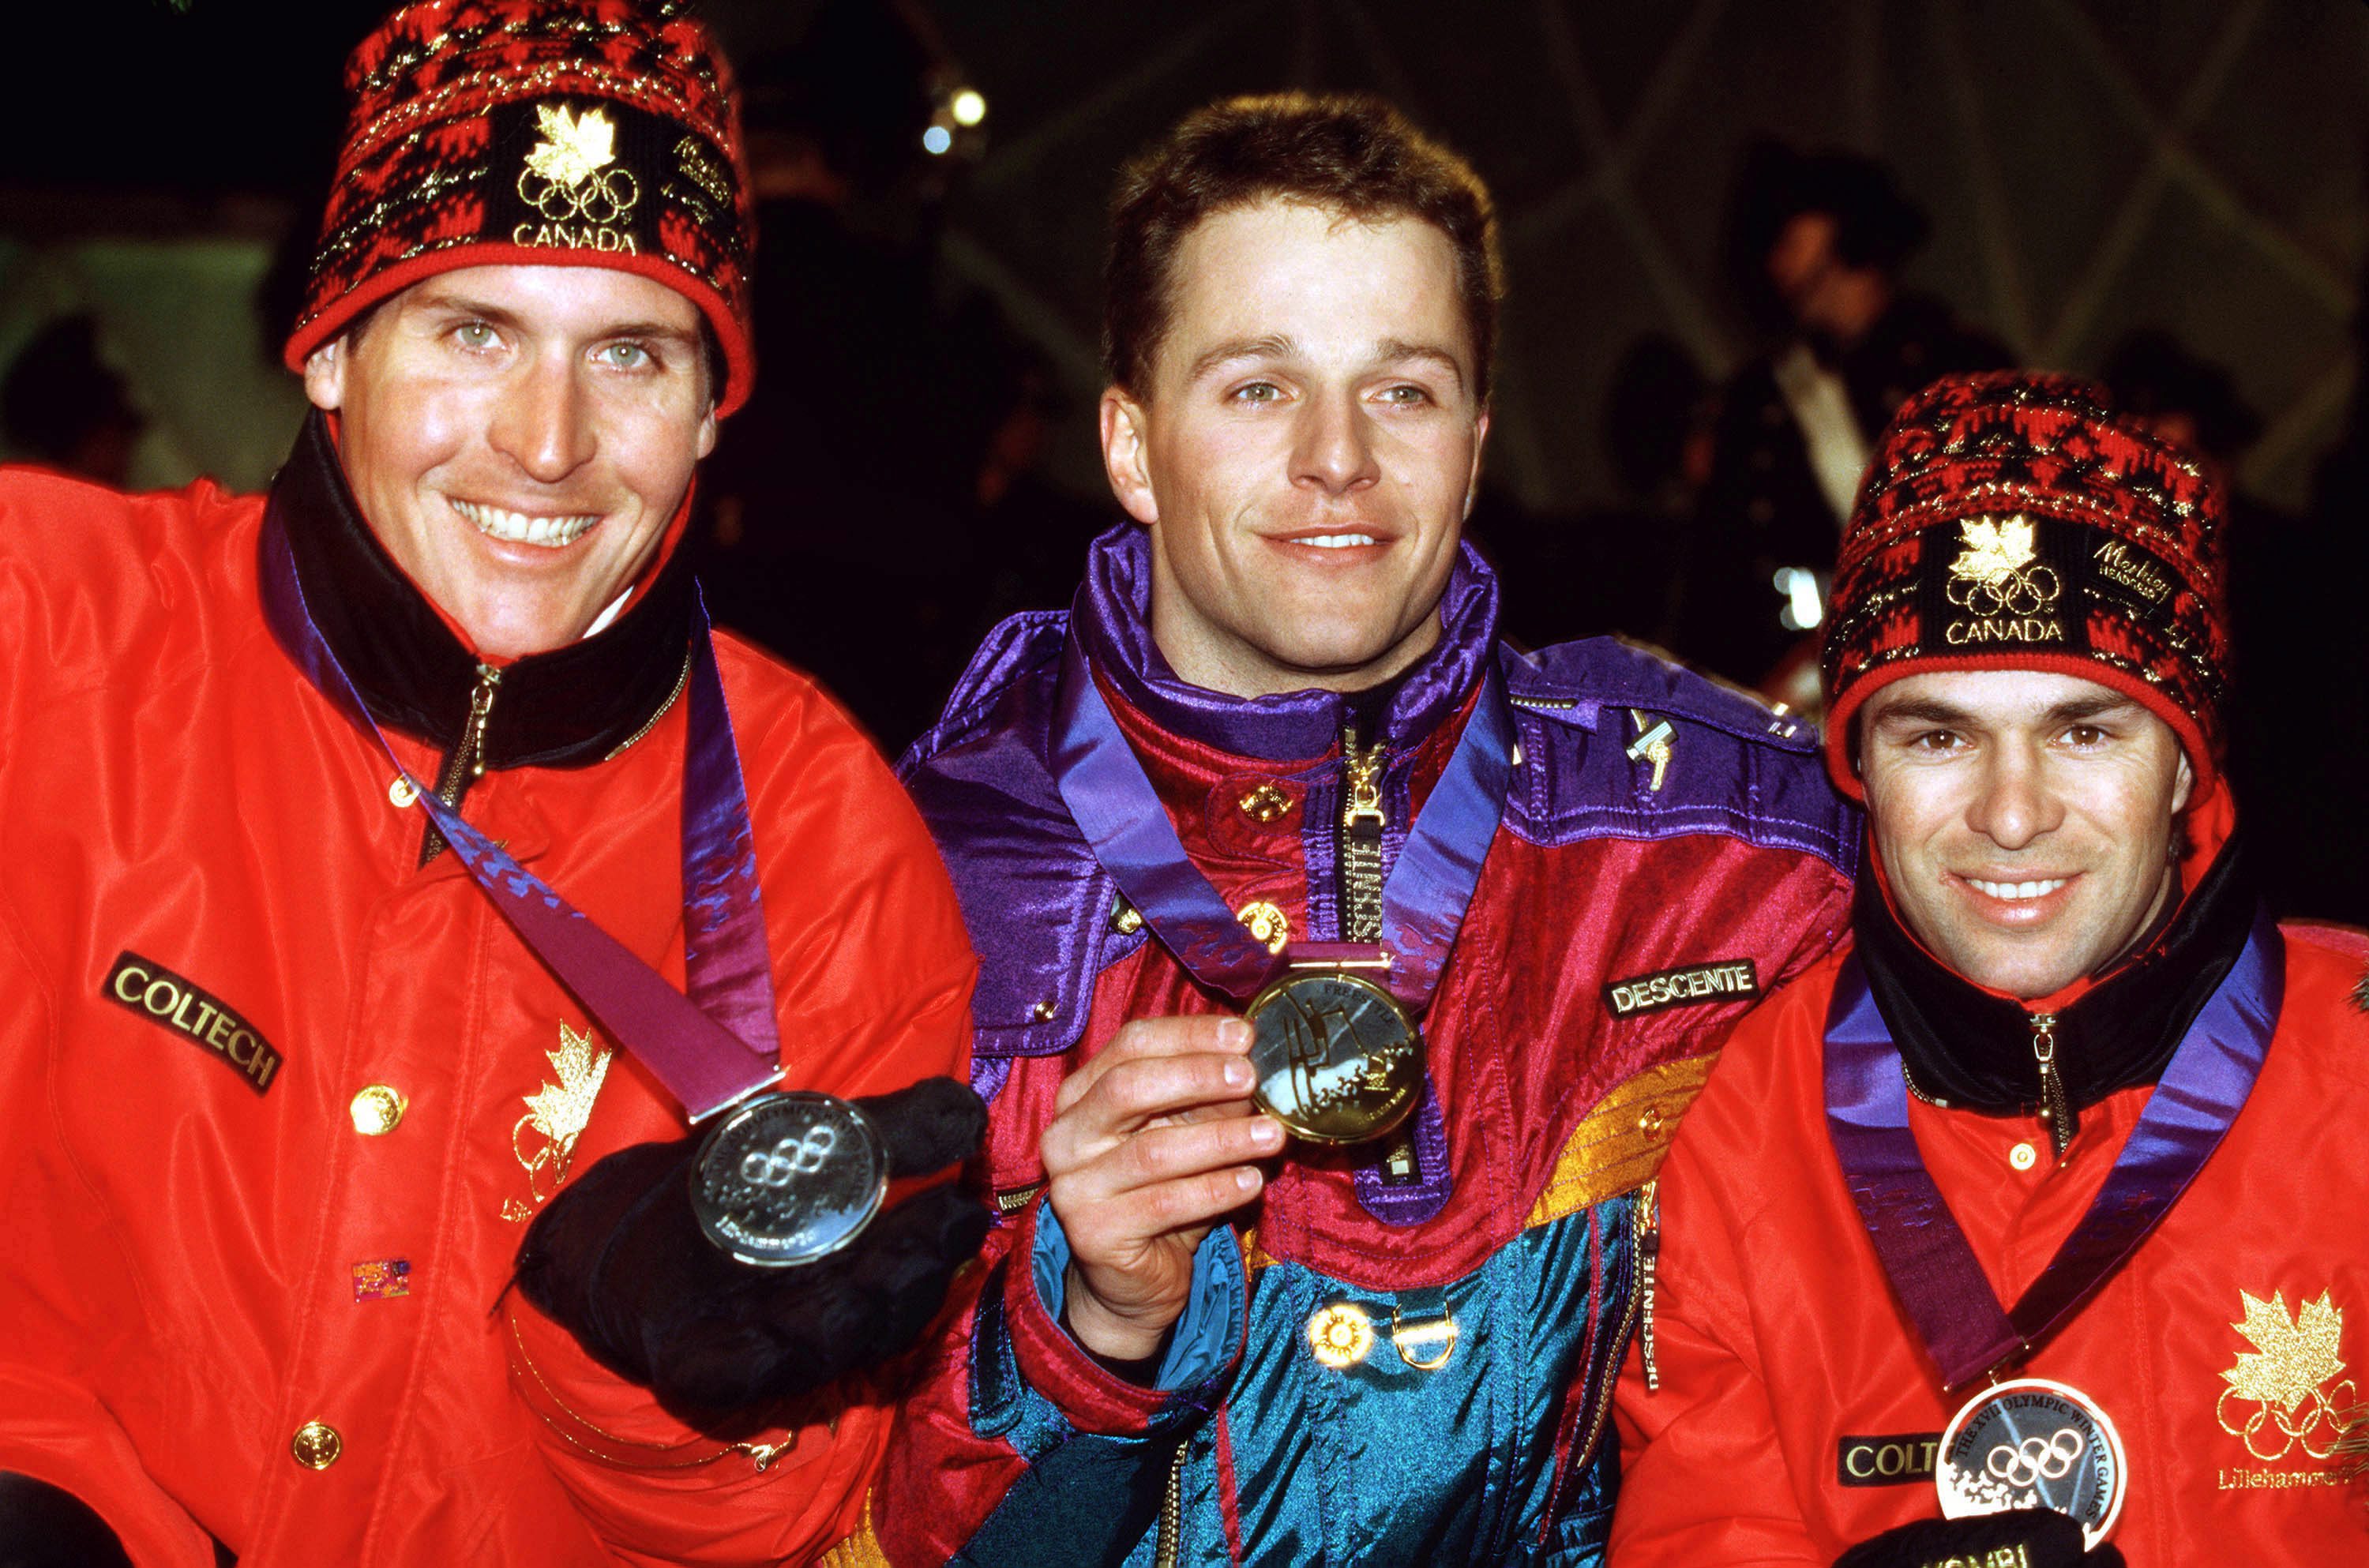 Canada's Philippe Laroche (left) and Lloyd Langlois (right) celebrate after winning respectively silver and bronze medals in the men's freestyle skiing aerials event at the Lillehammer 1994 Olympic Winter Games (CP Photo/ COC/Claus Andersen)